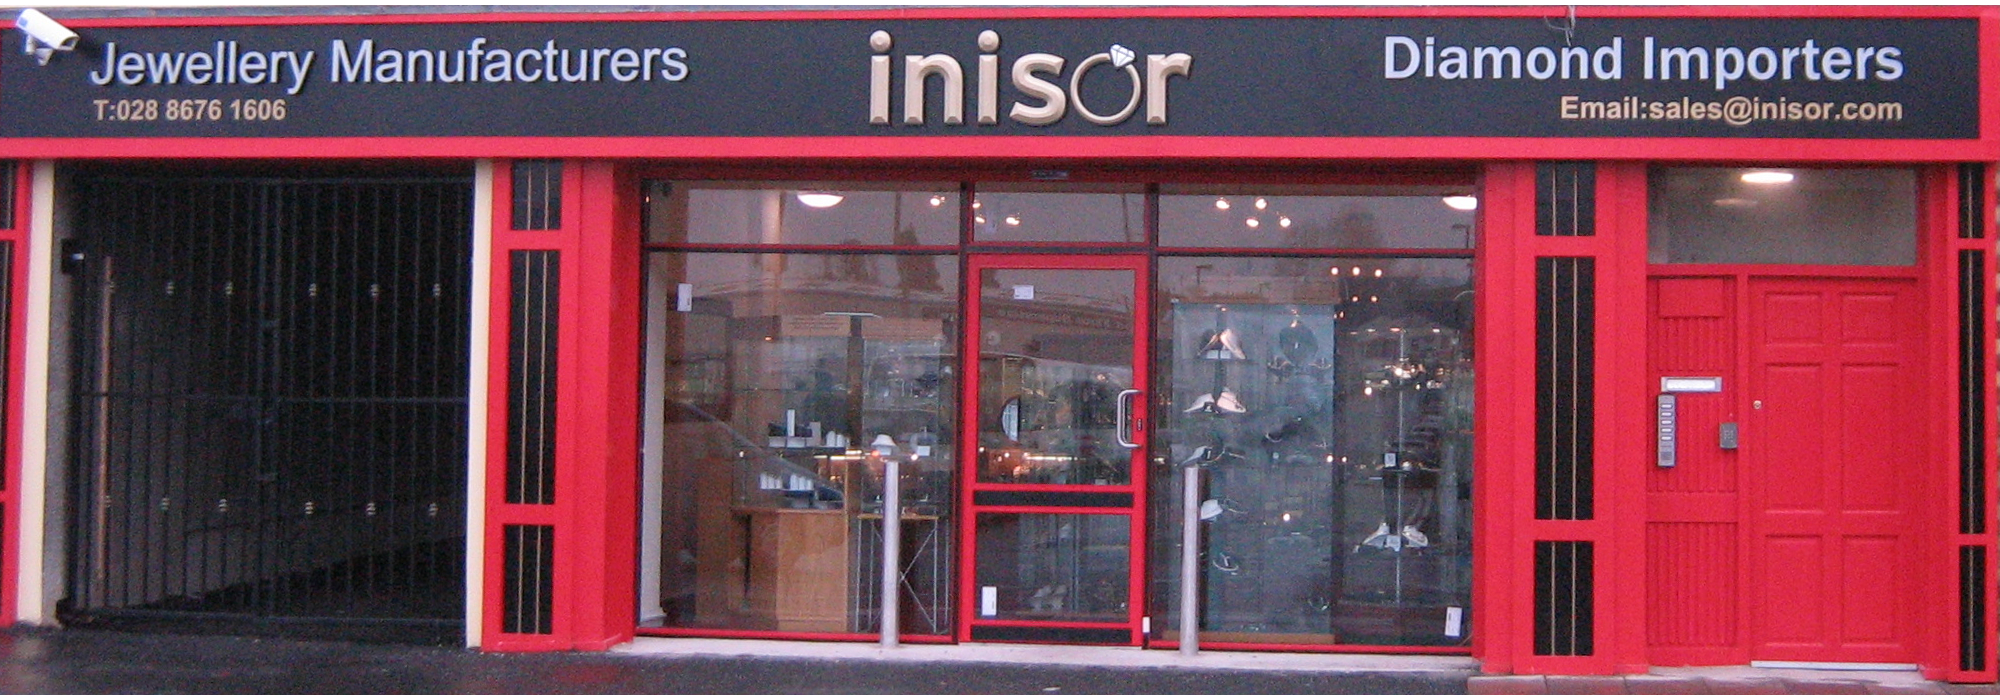 Shopfront of Inisor in Cookstown